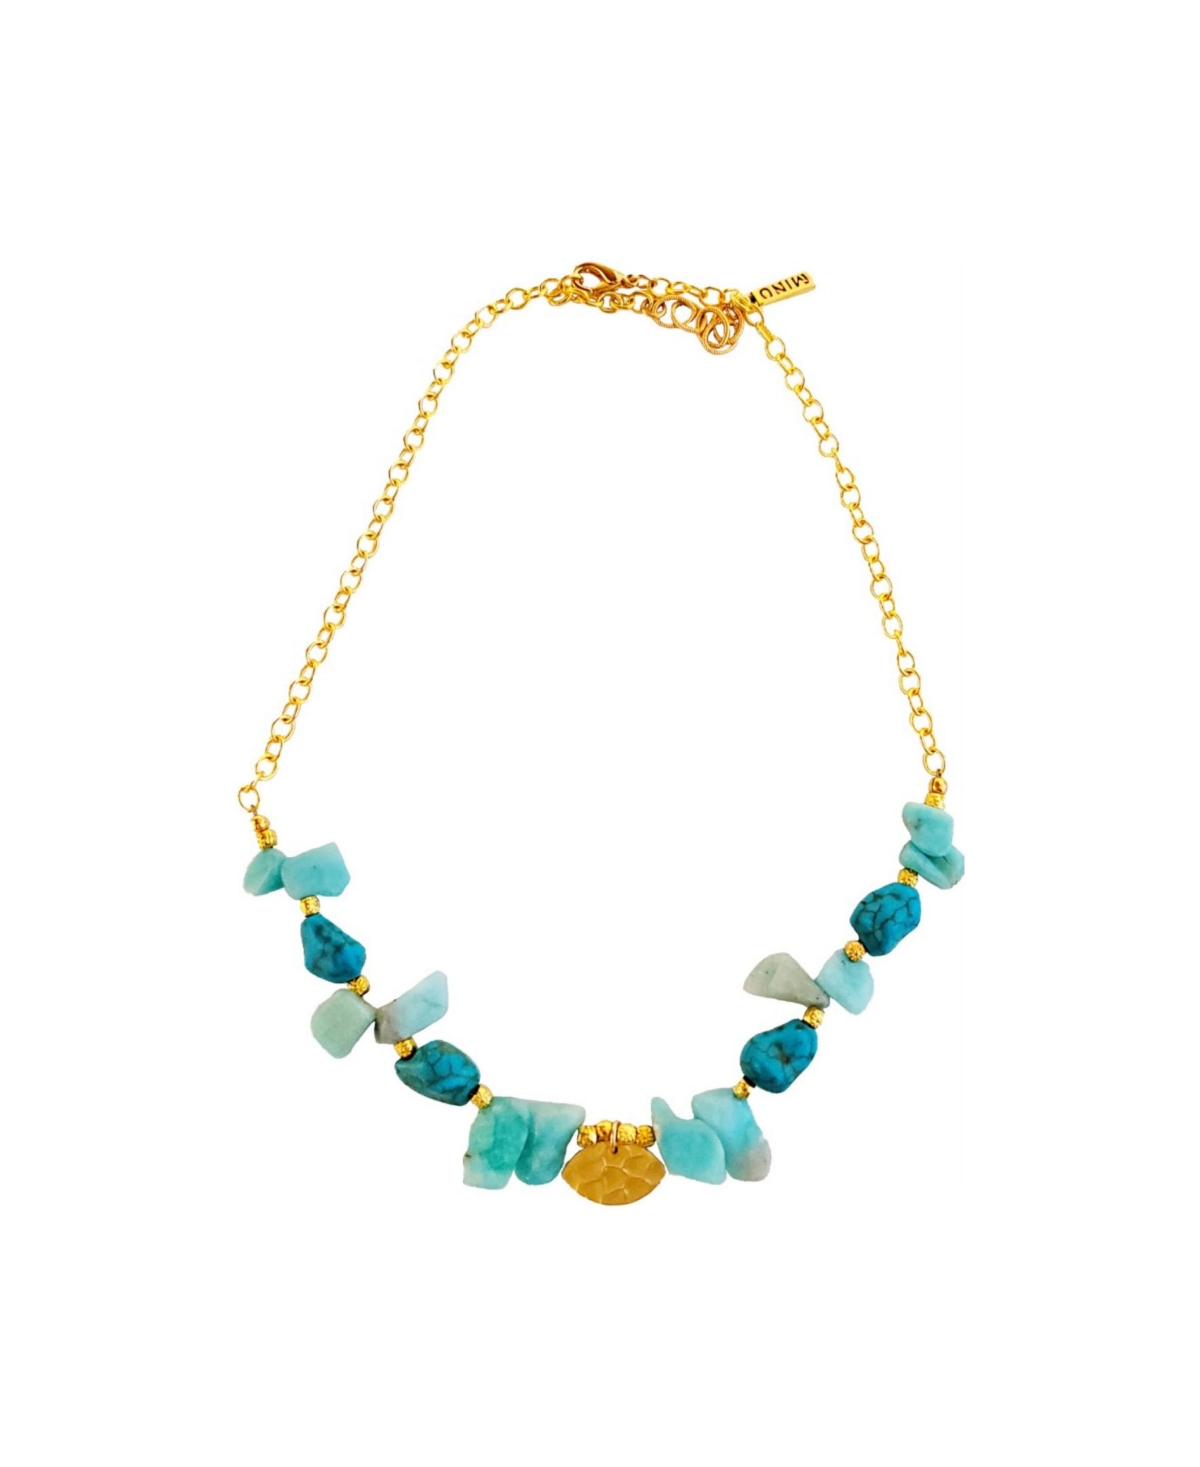 Women's Ain Necklace with Turquoise and Amazonite Stones - Gold-tone